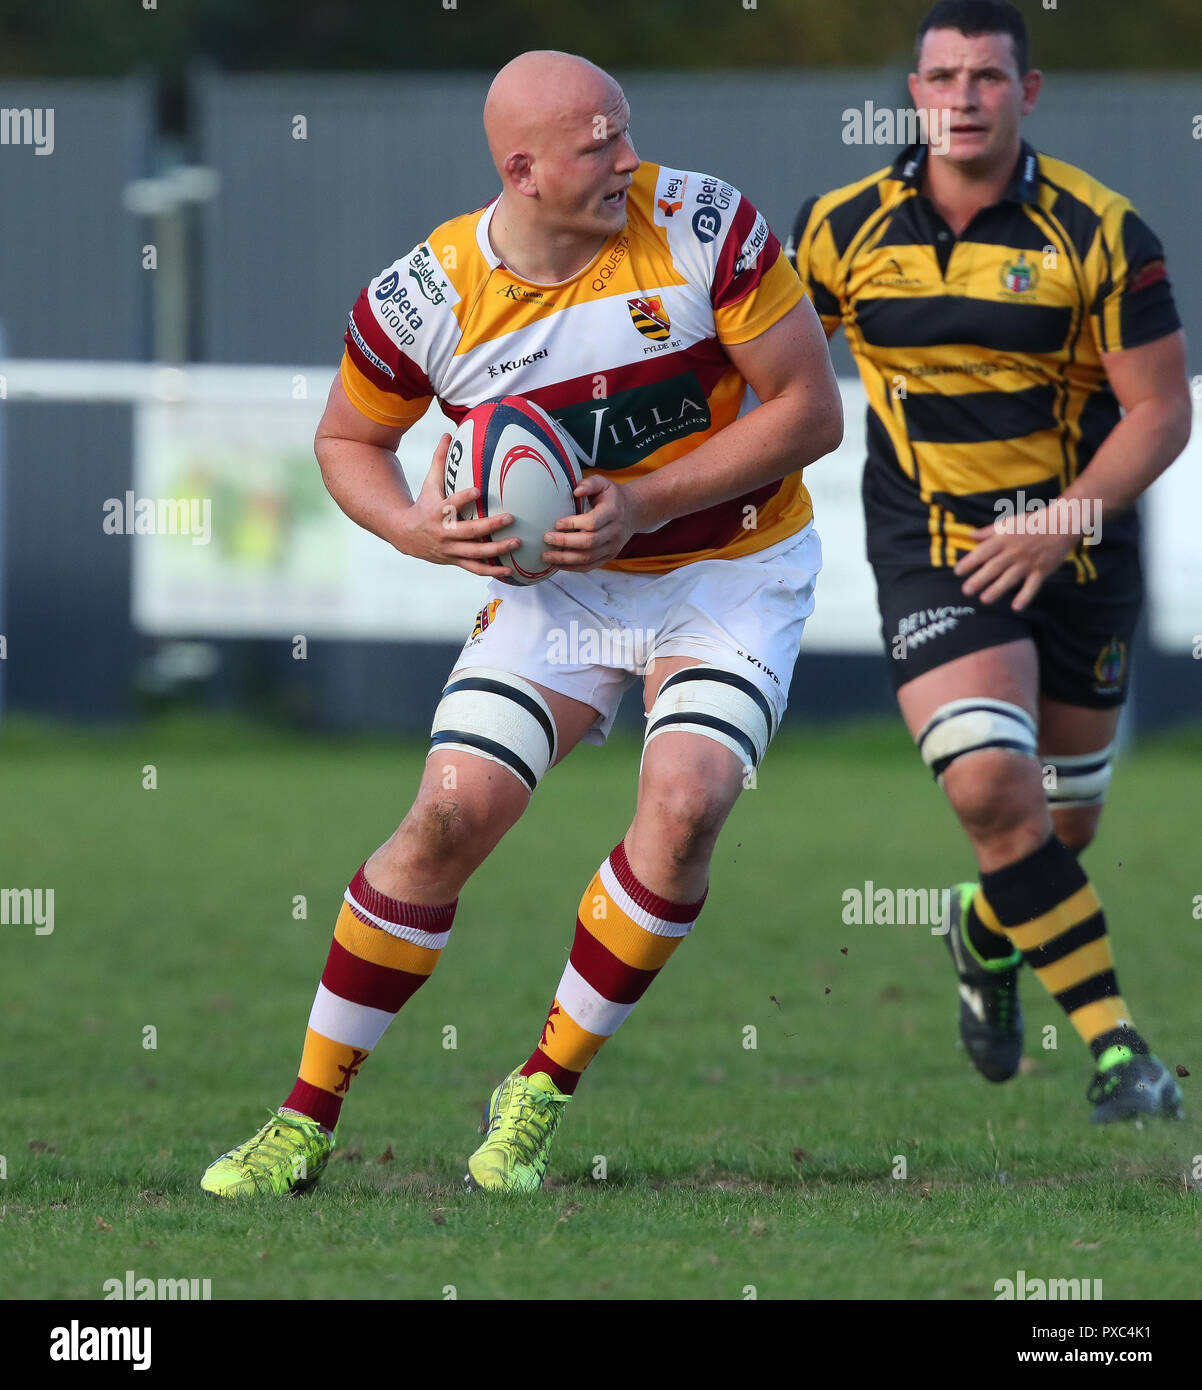 20.10.2018 Hinckley, Leicester, England. Rugby Union, Hinckley rfc v Fylde rfc.  Oliver Parkinson in action for Fylde      during the RFU National League 2 North (NL2N) game played at the Leicester  Road Stadium.    © Phil Hutchinson / Alamy Live News Stock Photo